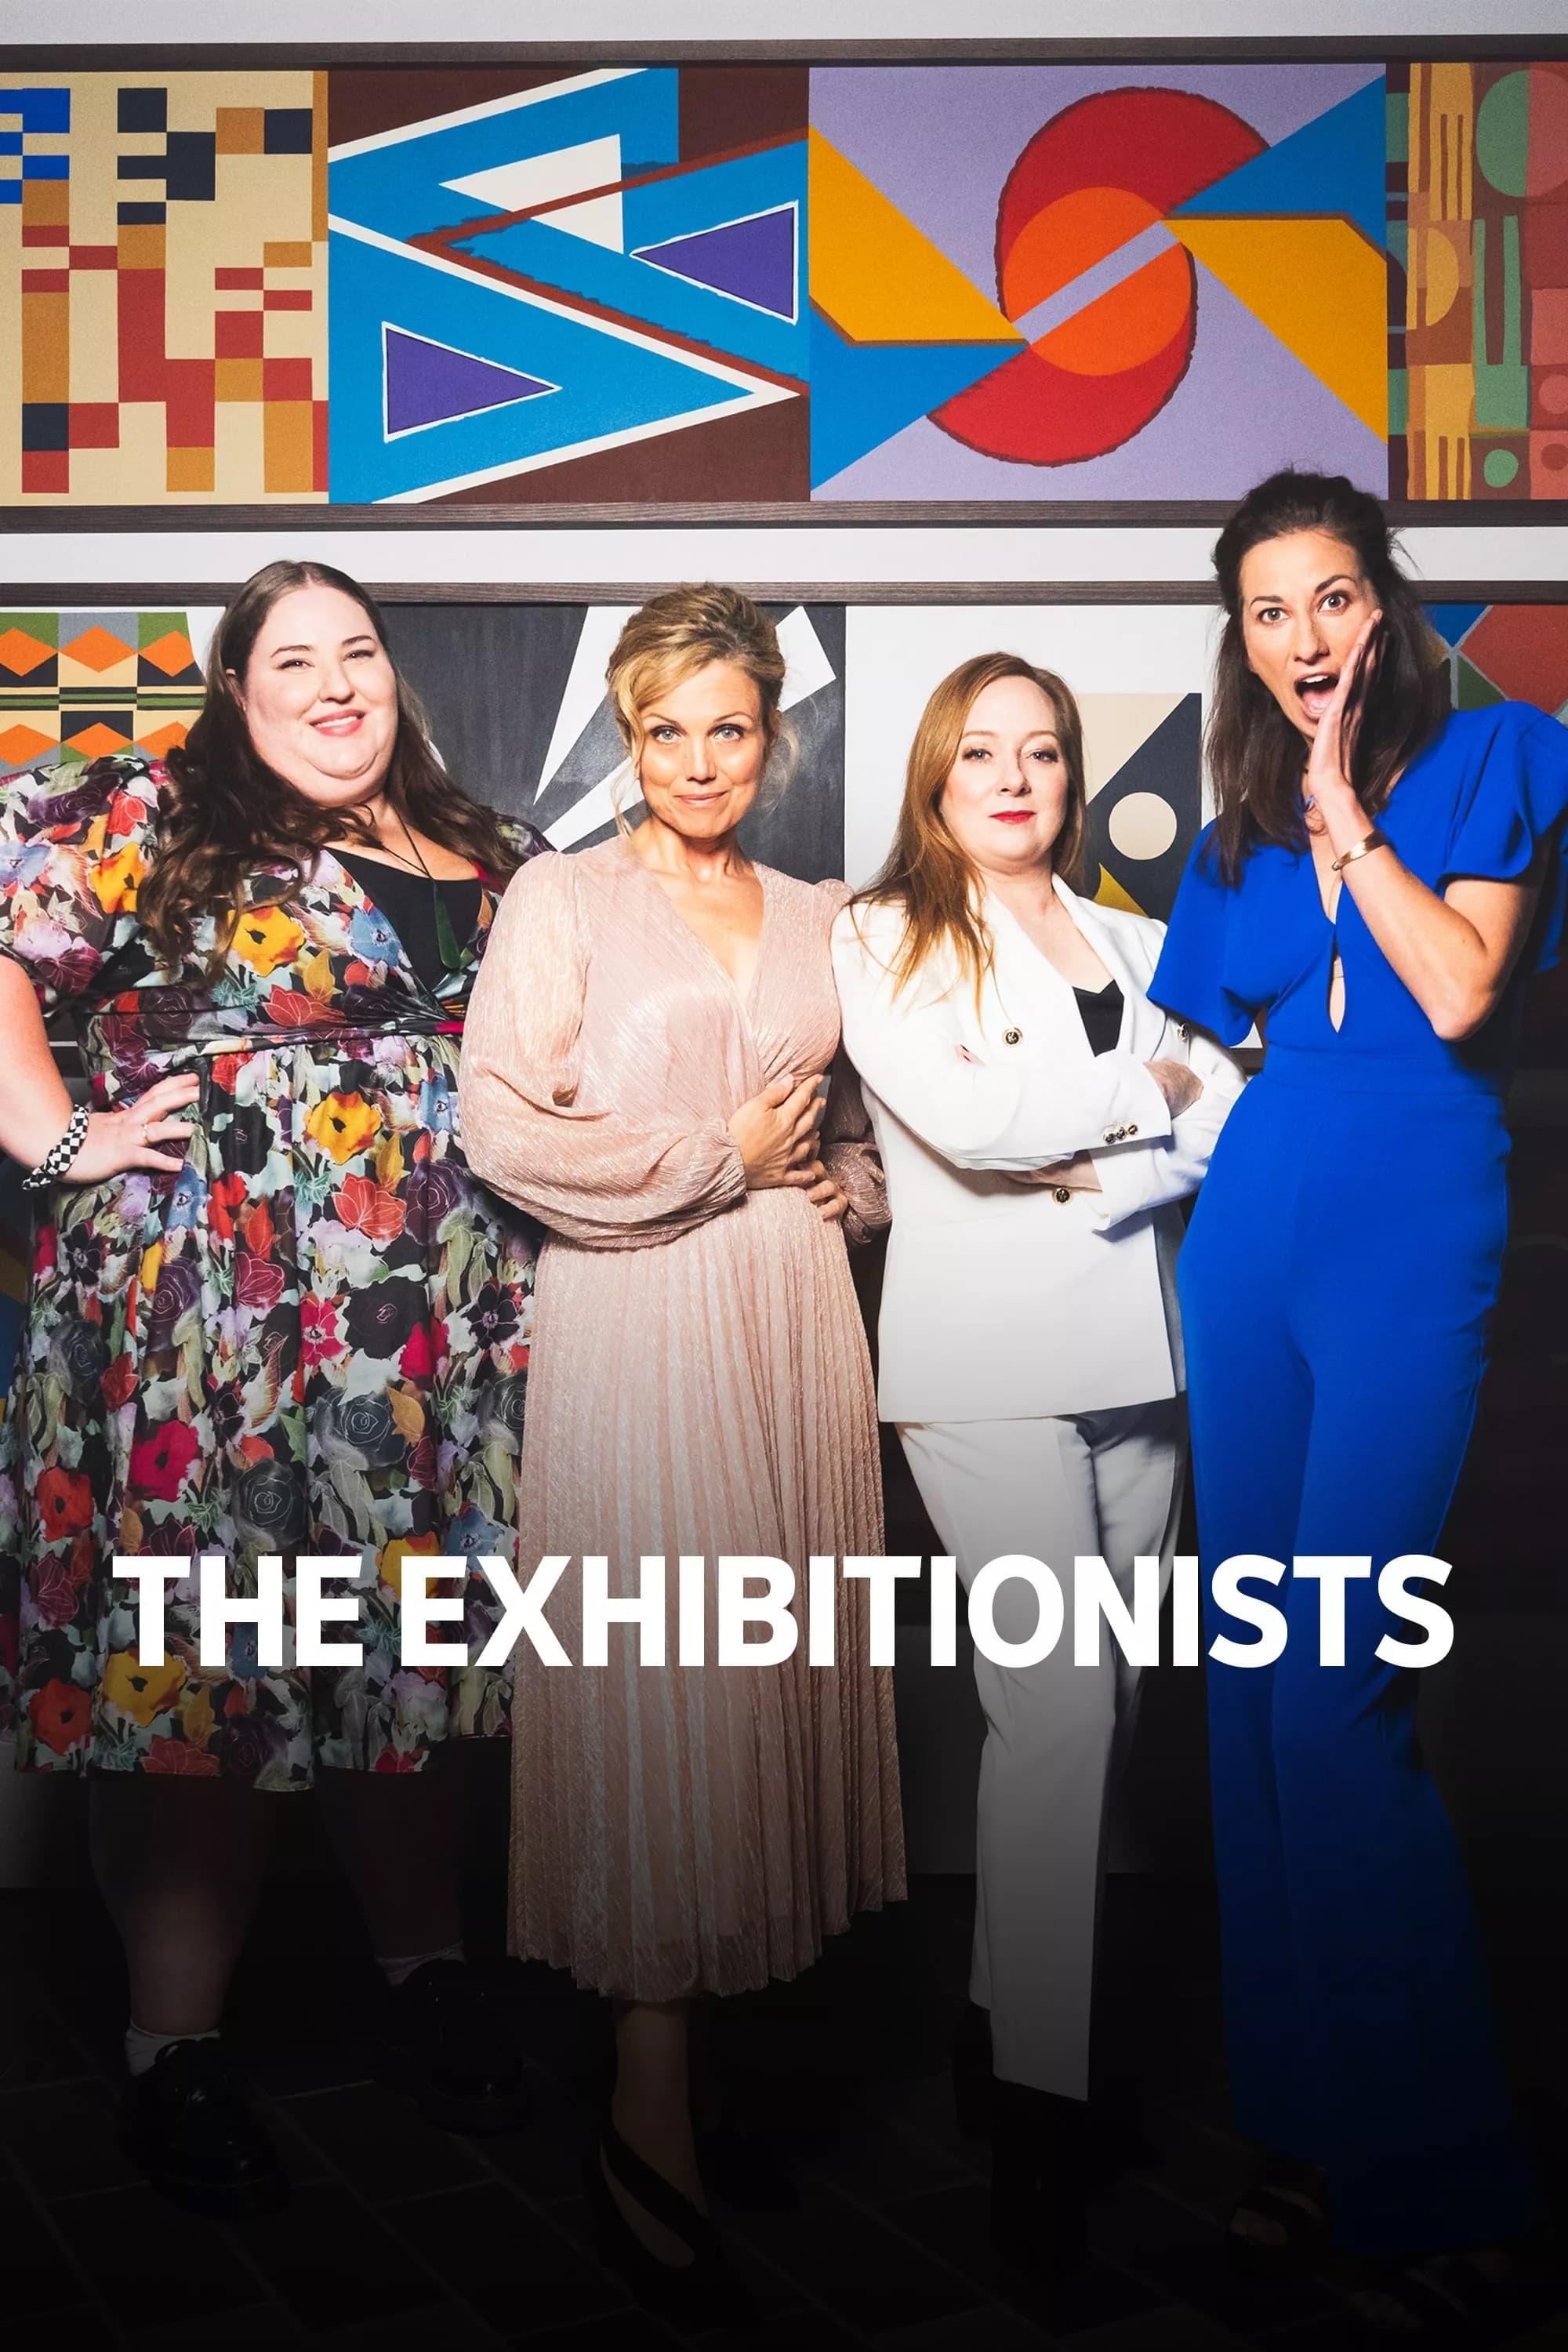 The Exhibitionists poster